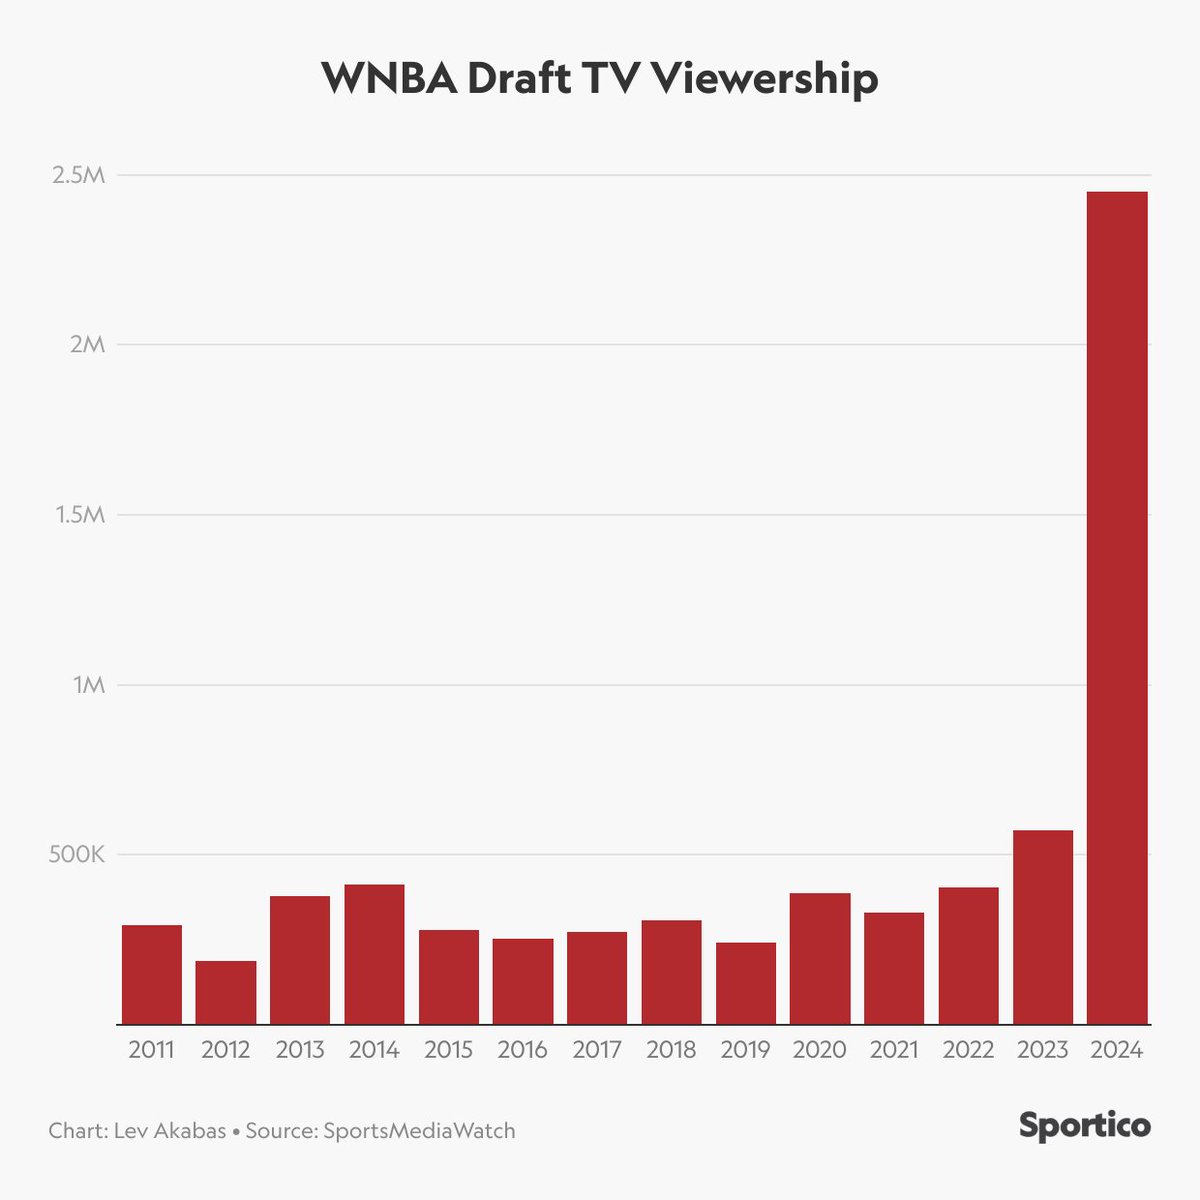 Last night's 2024 #WNBADraft was watched by an average of 2.45 million viewers. That's more than the previous 6 @WNBA Drafts combined (H/T @Sportico). The numbers suggest Caitlin Clark, Cameron Brink, Angel Reese & the 2024 class is about to ignite a ratings boom for the WNBA.